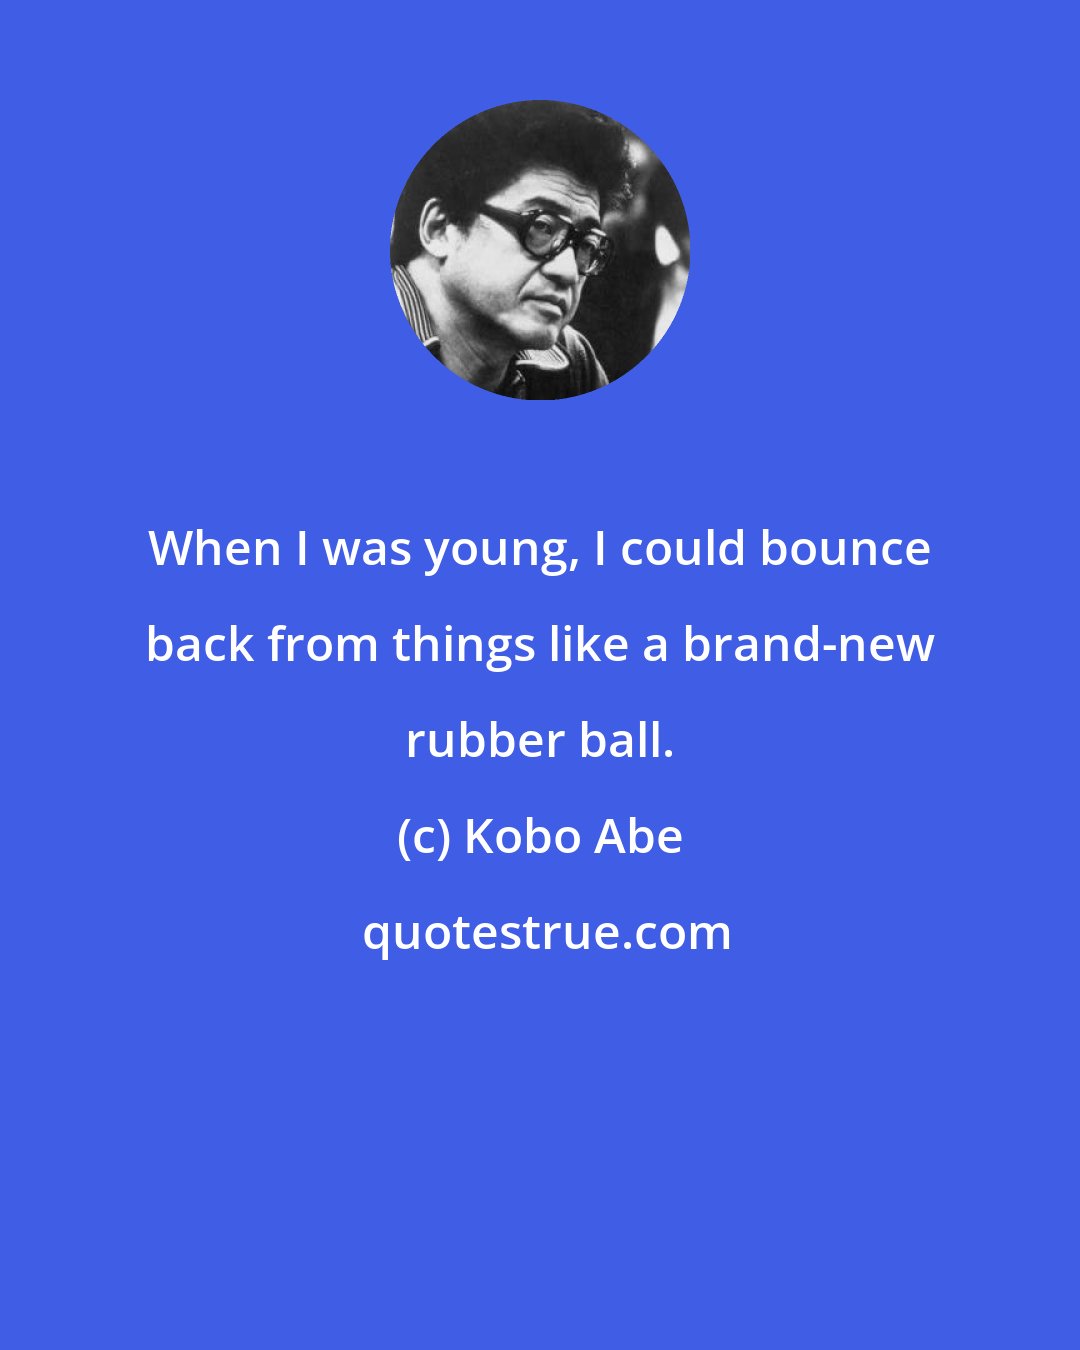 Kobo Abe: When I was young, I could bounce back from things like a brand-new rubber ball.